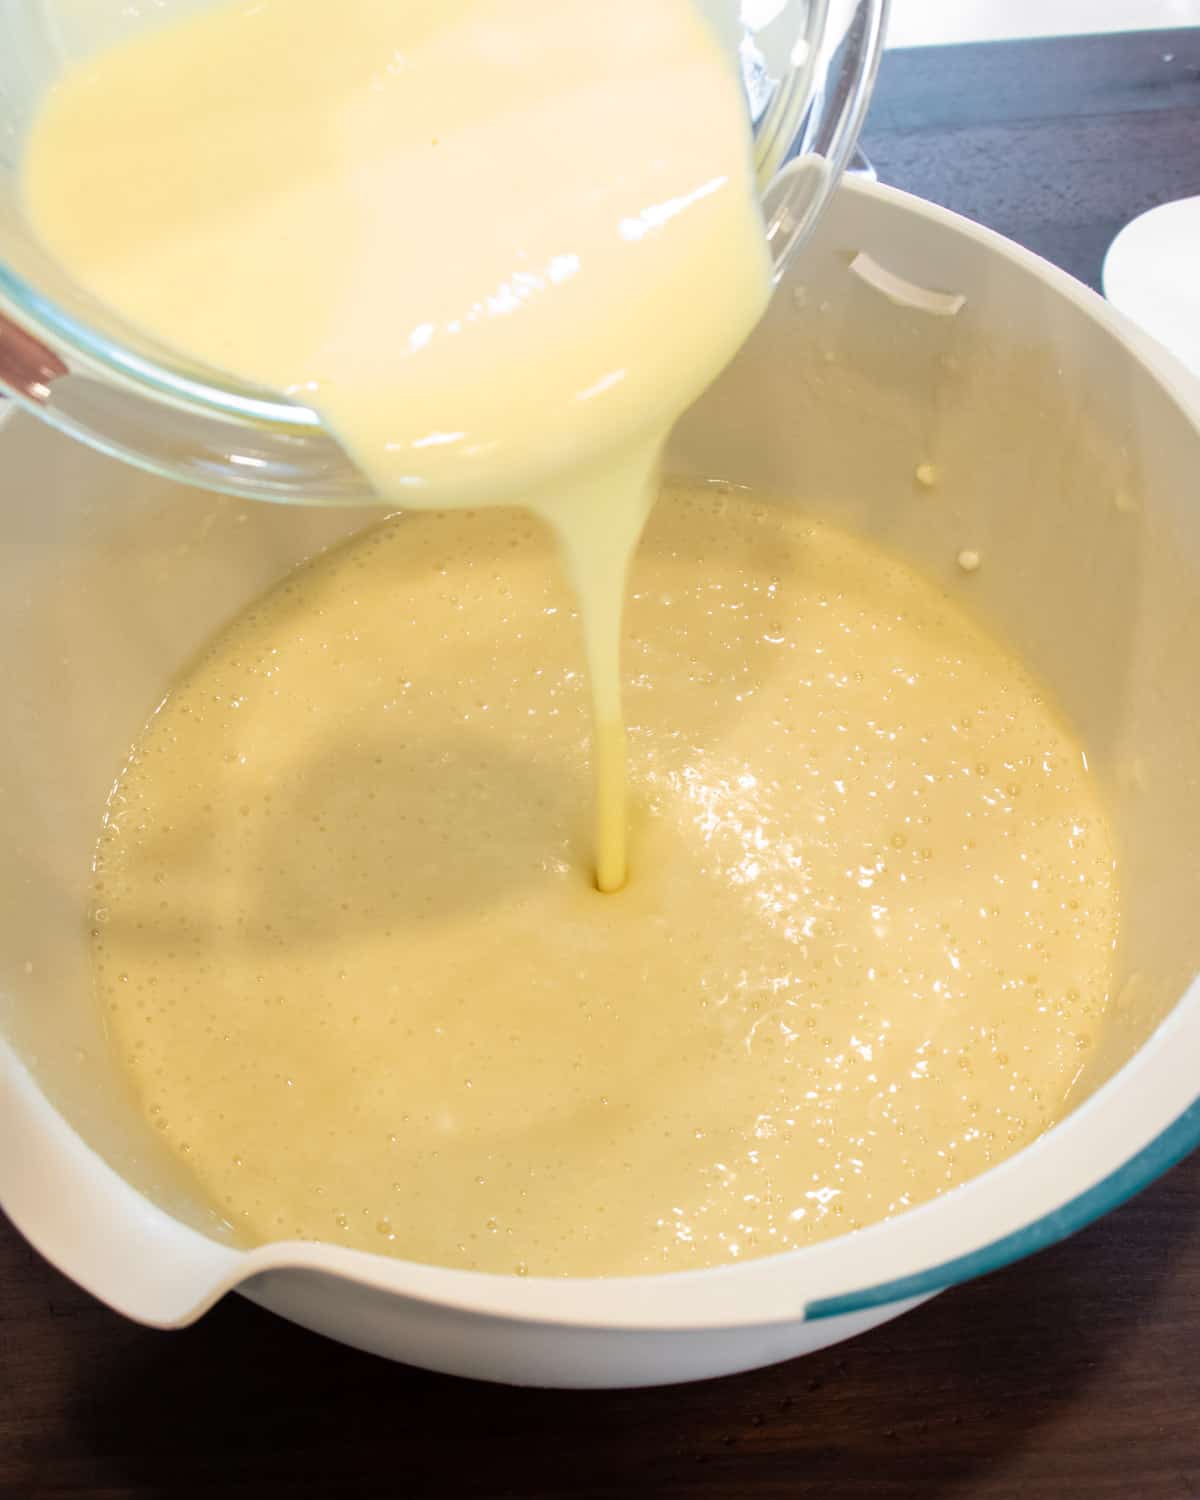 Cake batter being poured into a bowl.